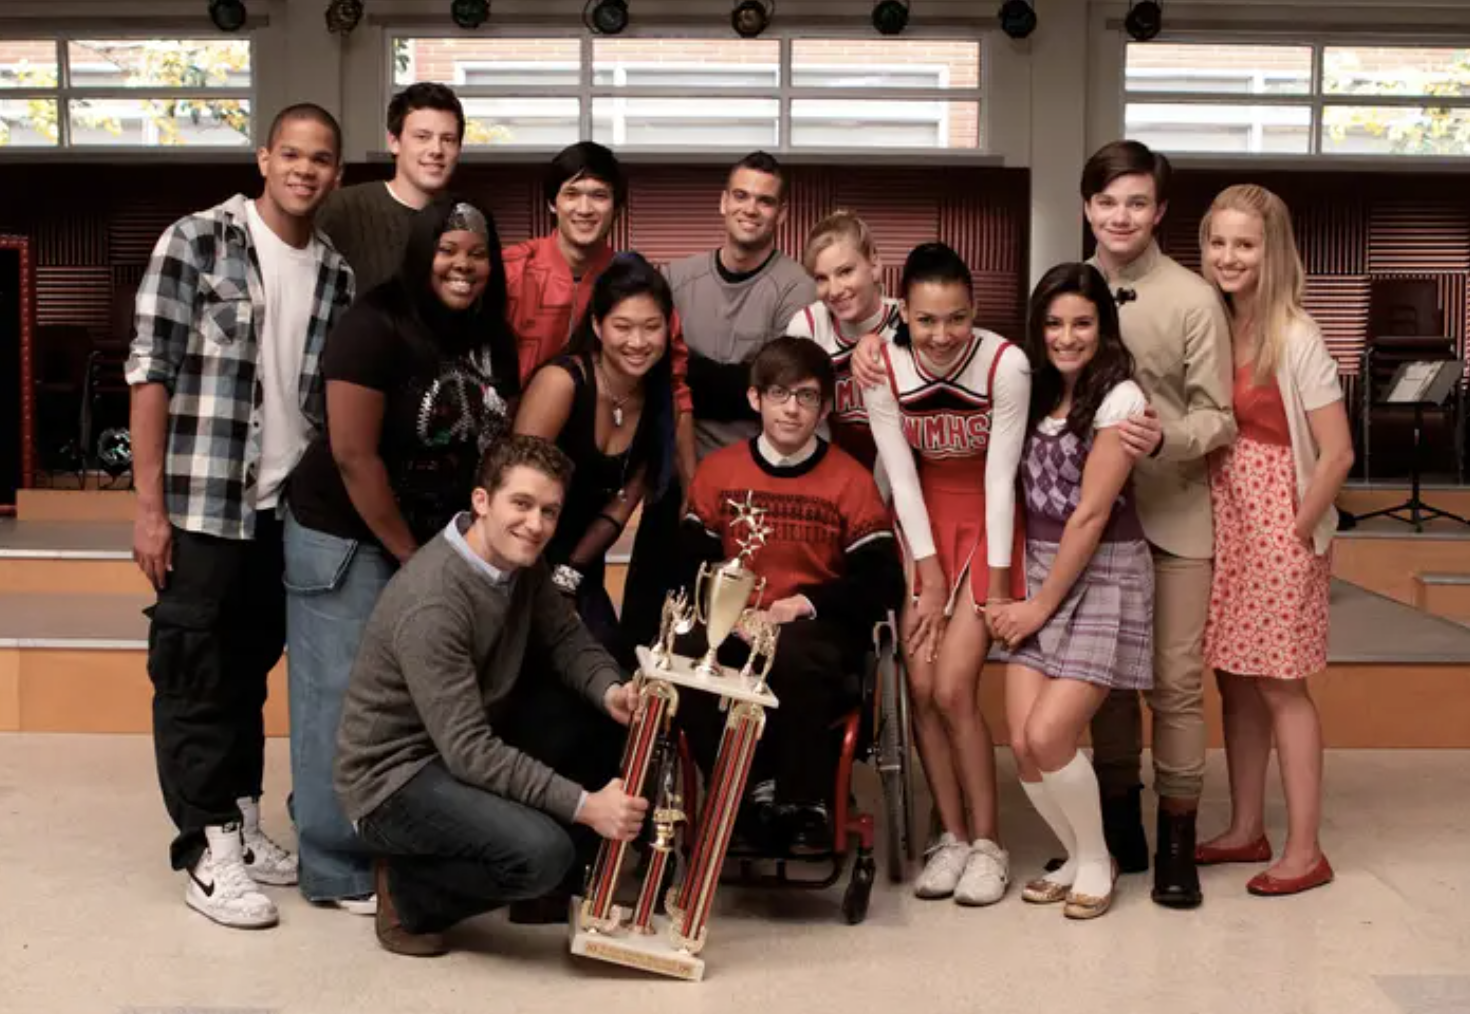 The Glee cast smiles for a group photo with a trophy in a classroom